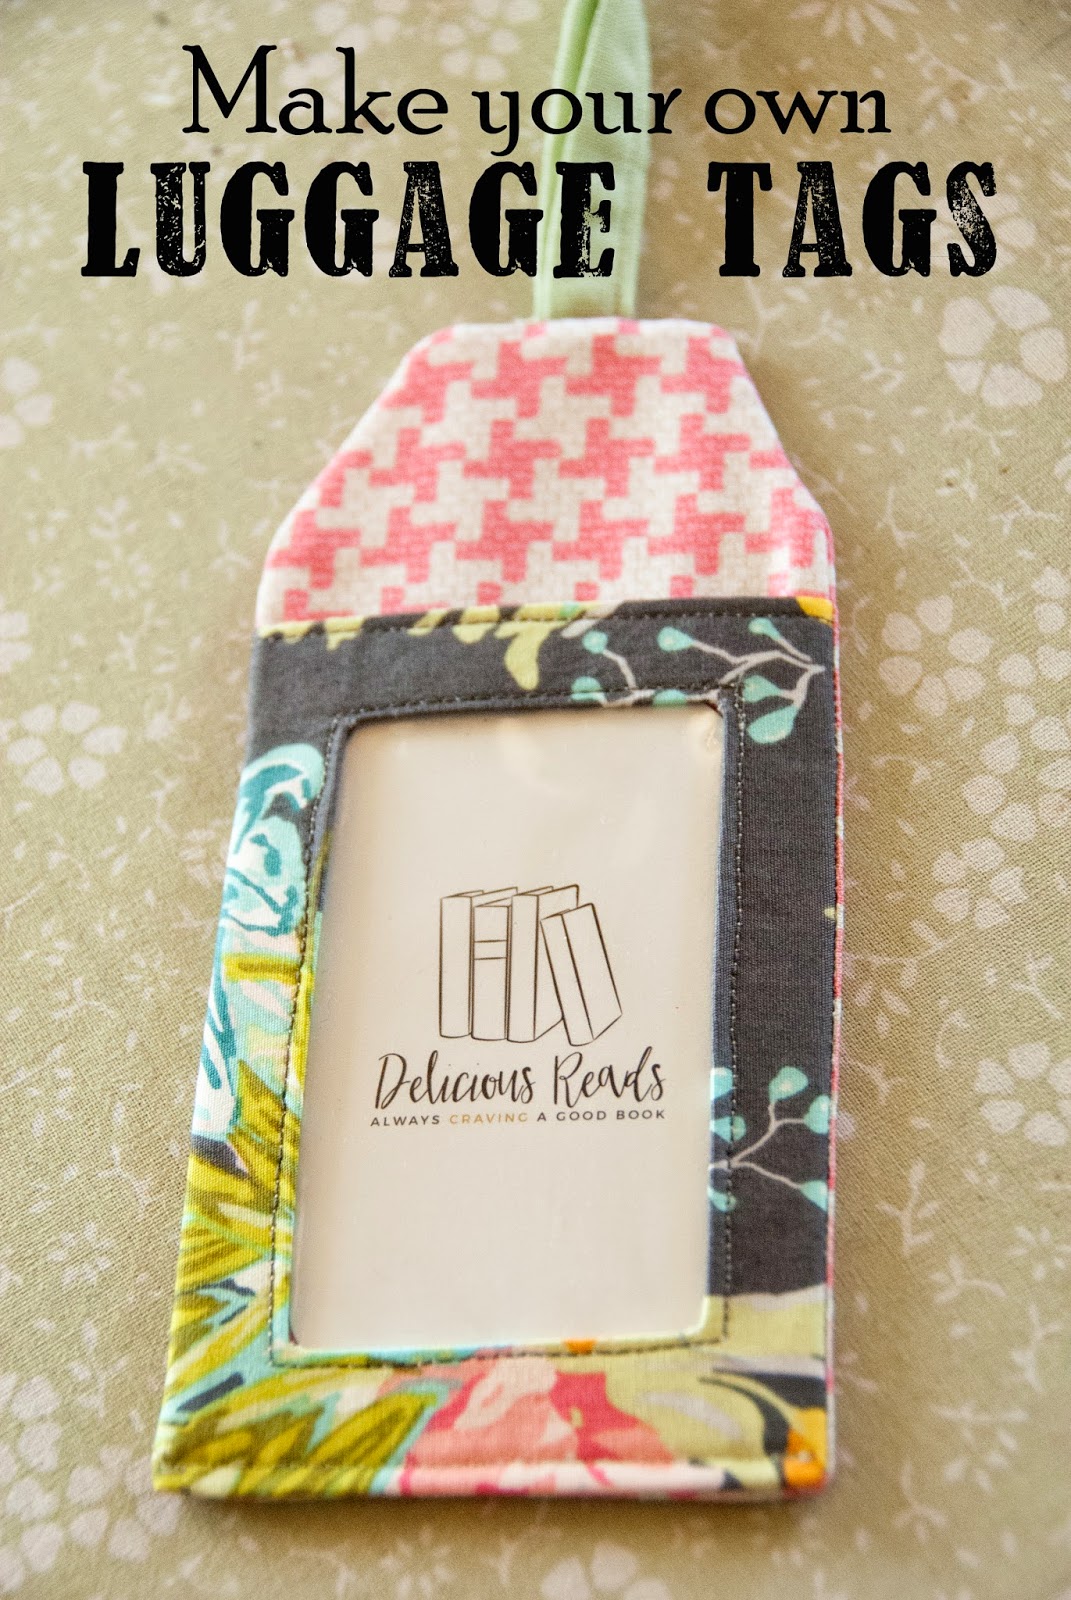 delicious-reads-diy-make-your-own-luggage-tags-link-to-pdf-pattern